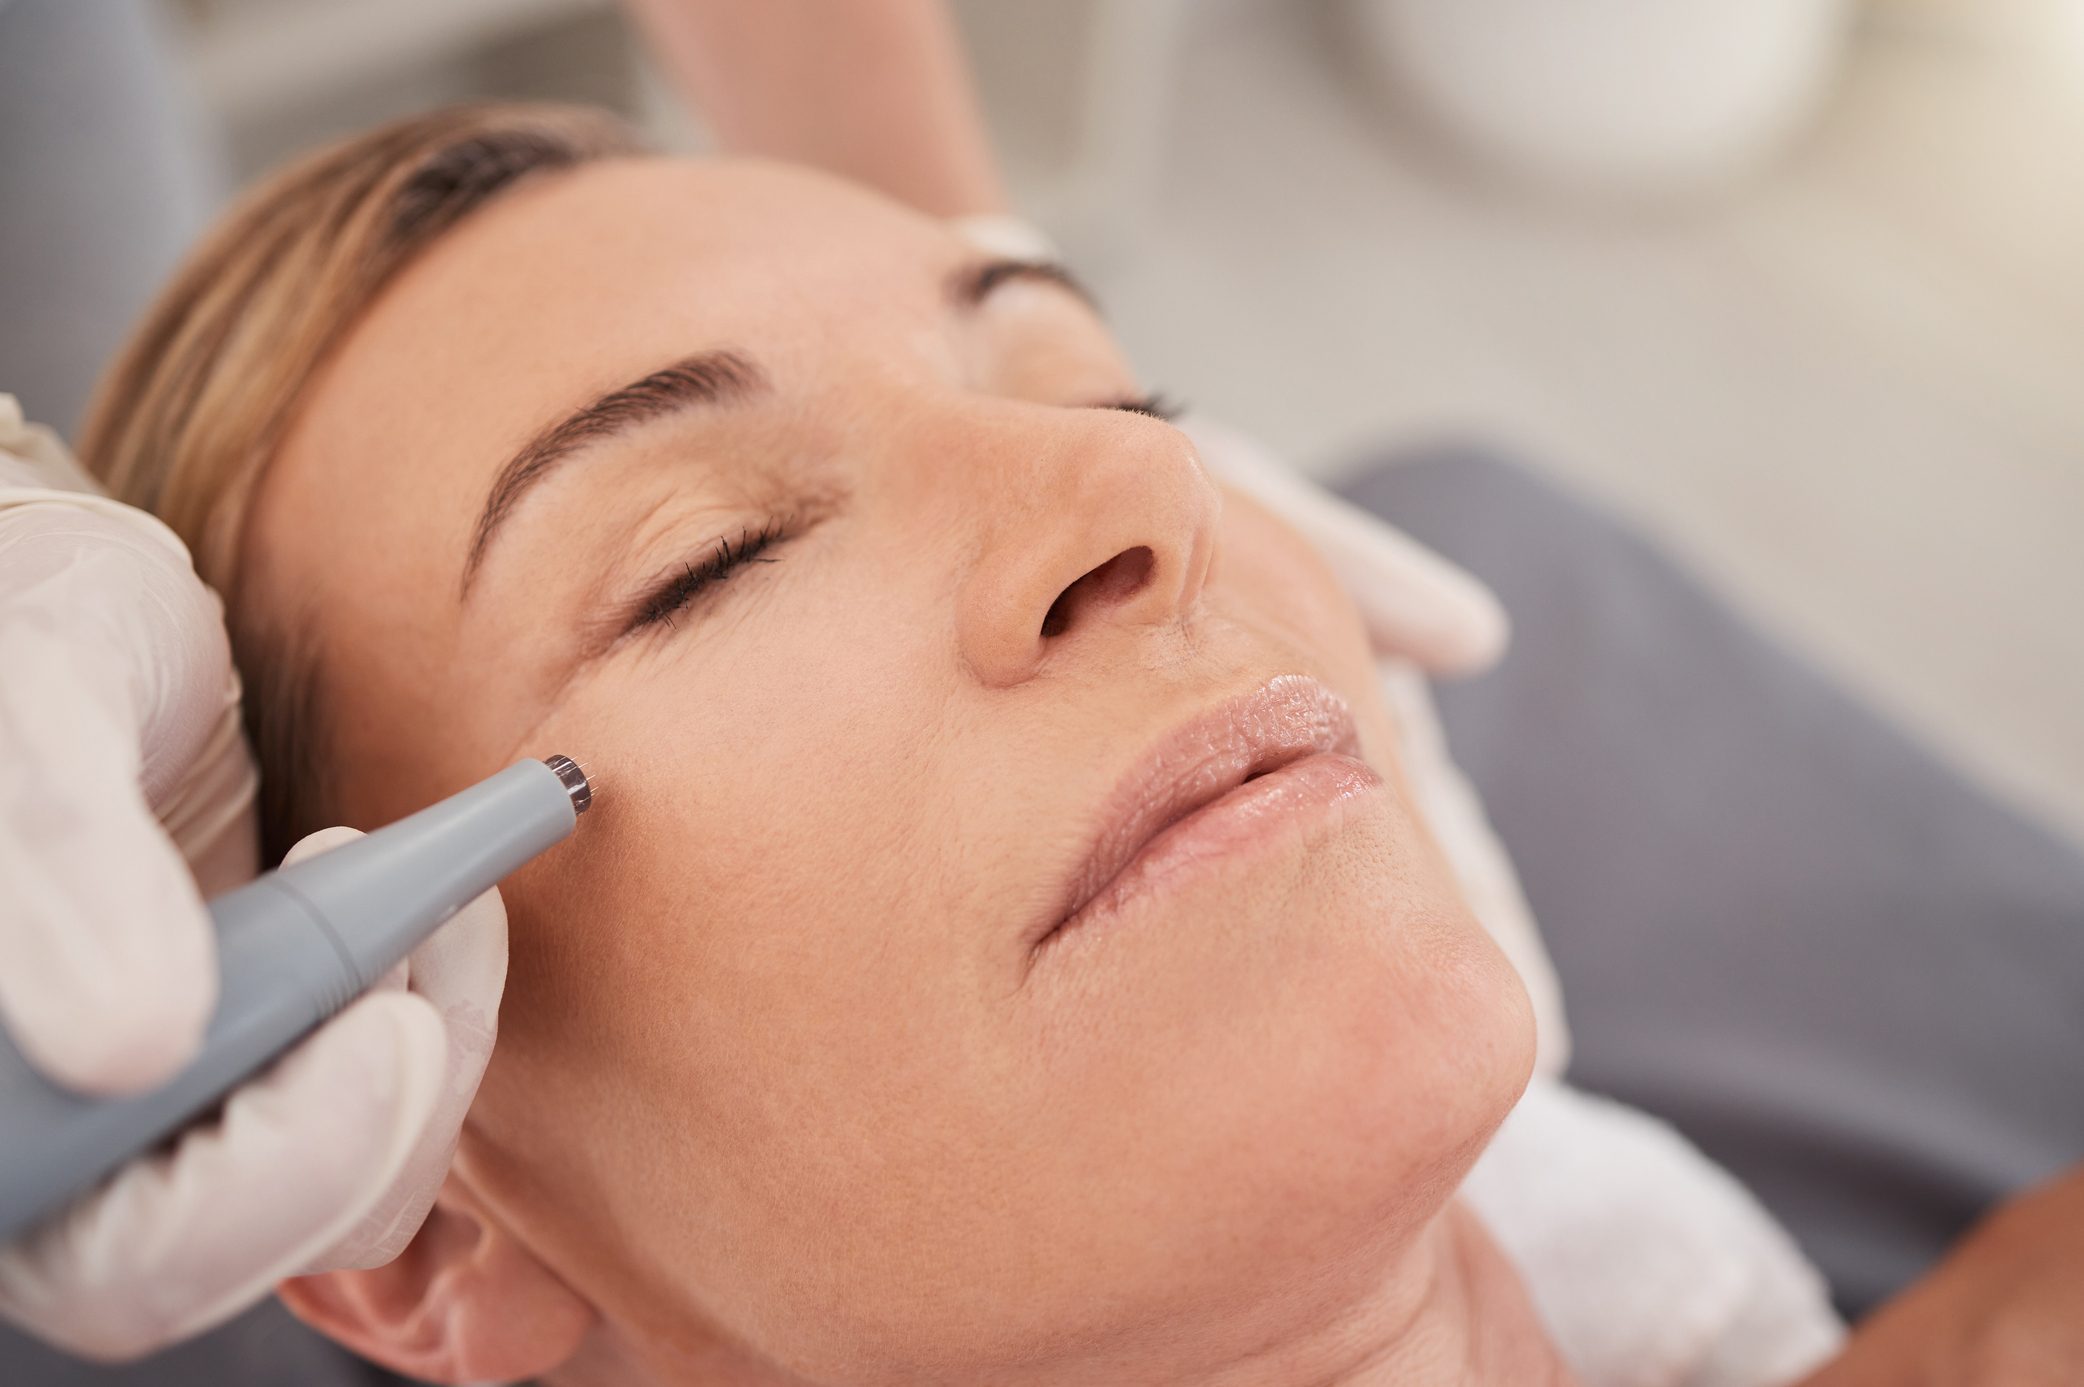 Skin-Tightening Treatments in 2023 That Can Take Years Off Your Face